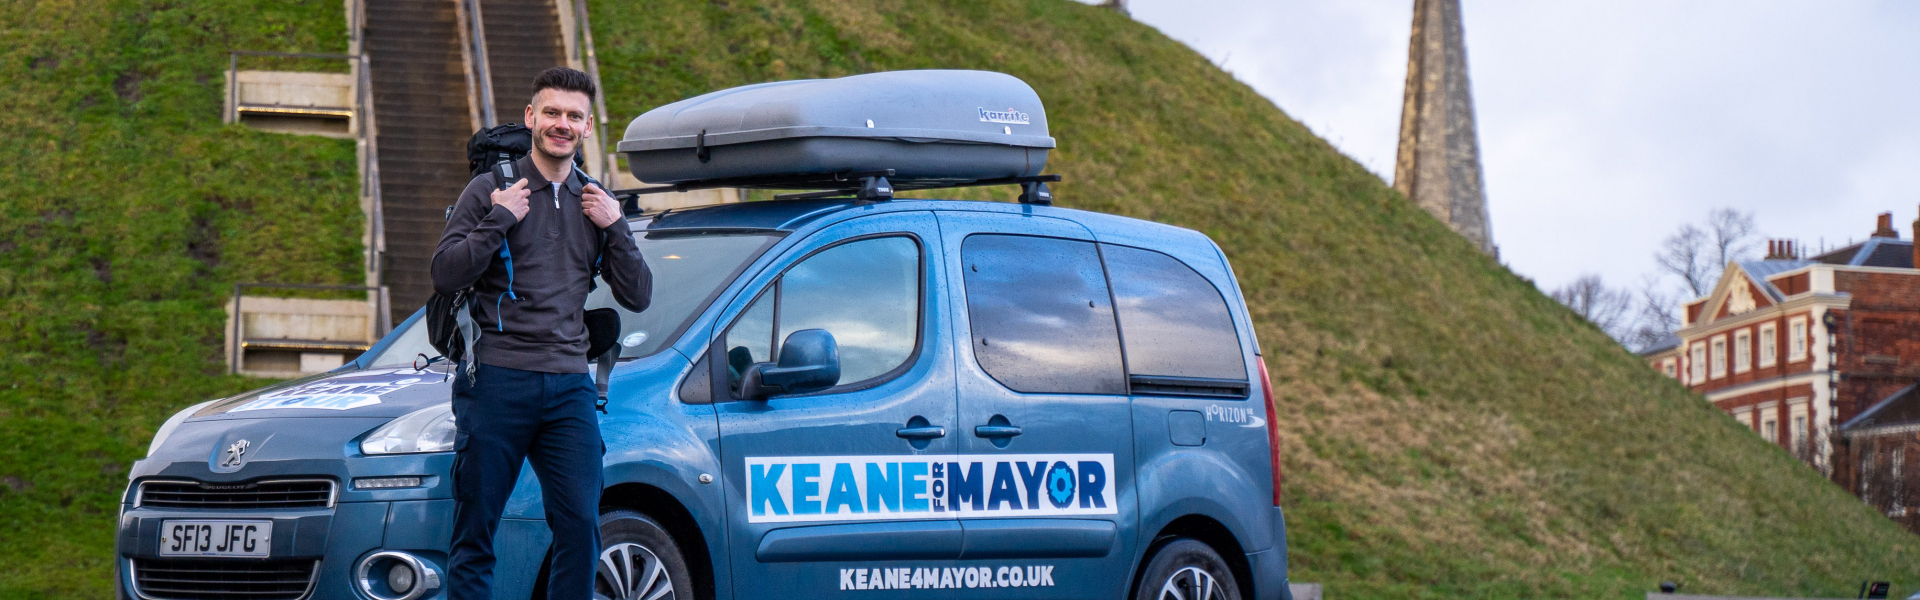 Keane Duncan with his campaign campervan